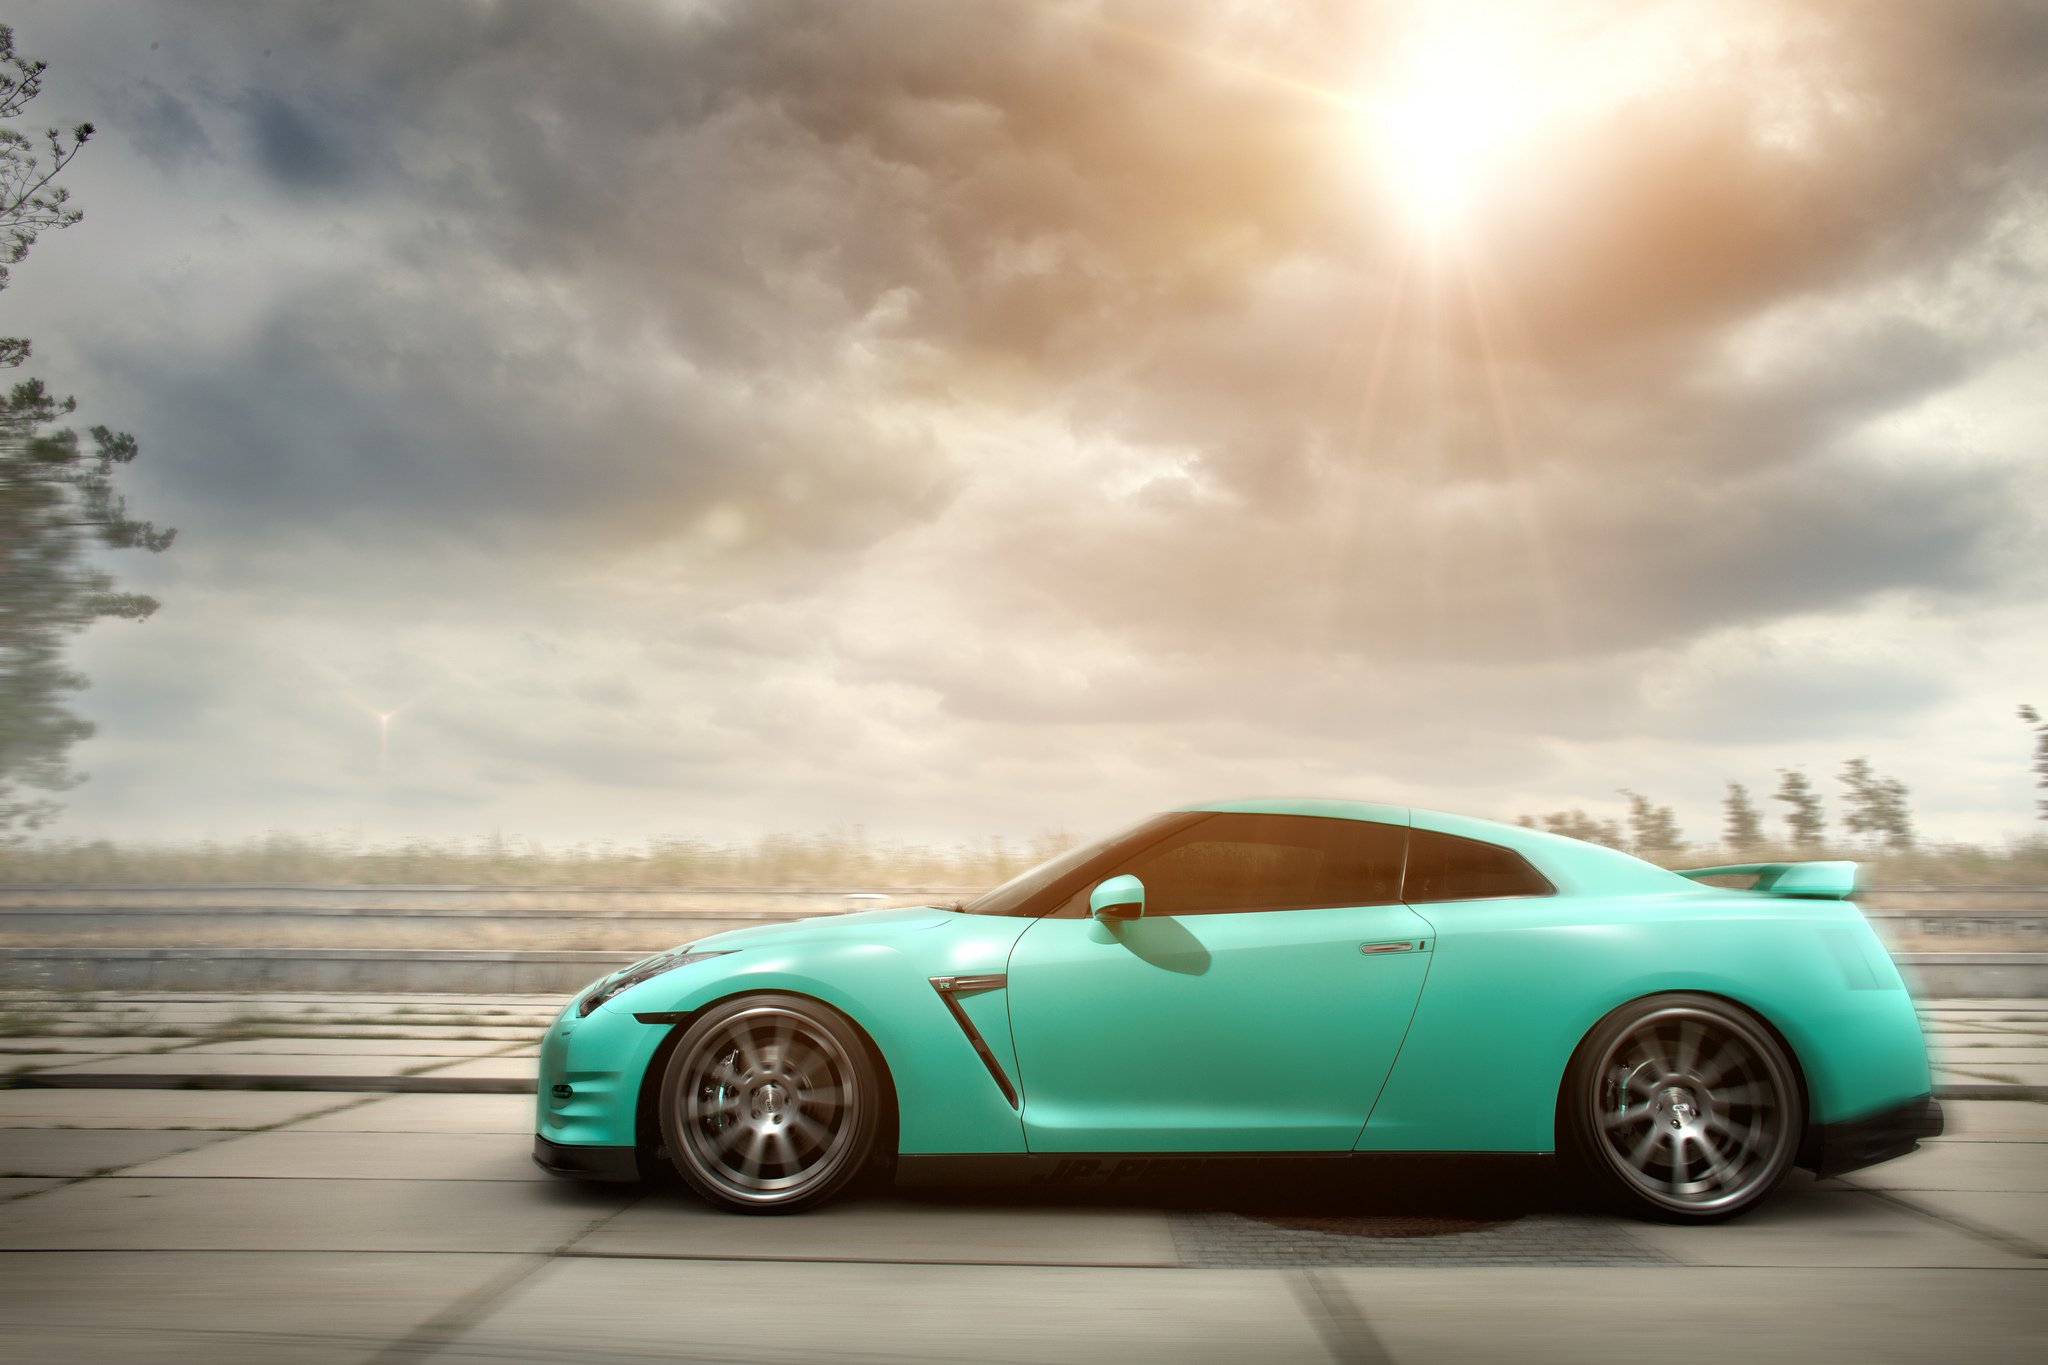 gt r, Nismo, Nissan, R35, Tuning, Supercar, Coupe, Japan, Cars, Green, Verte, Verde Wallpaper